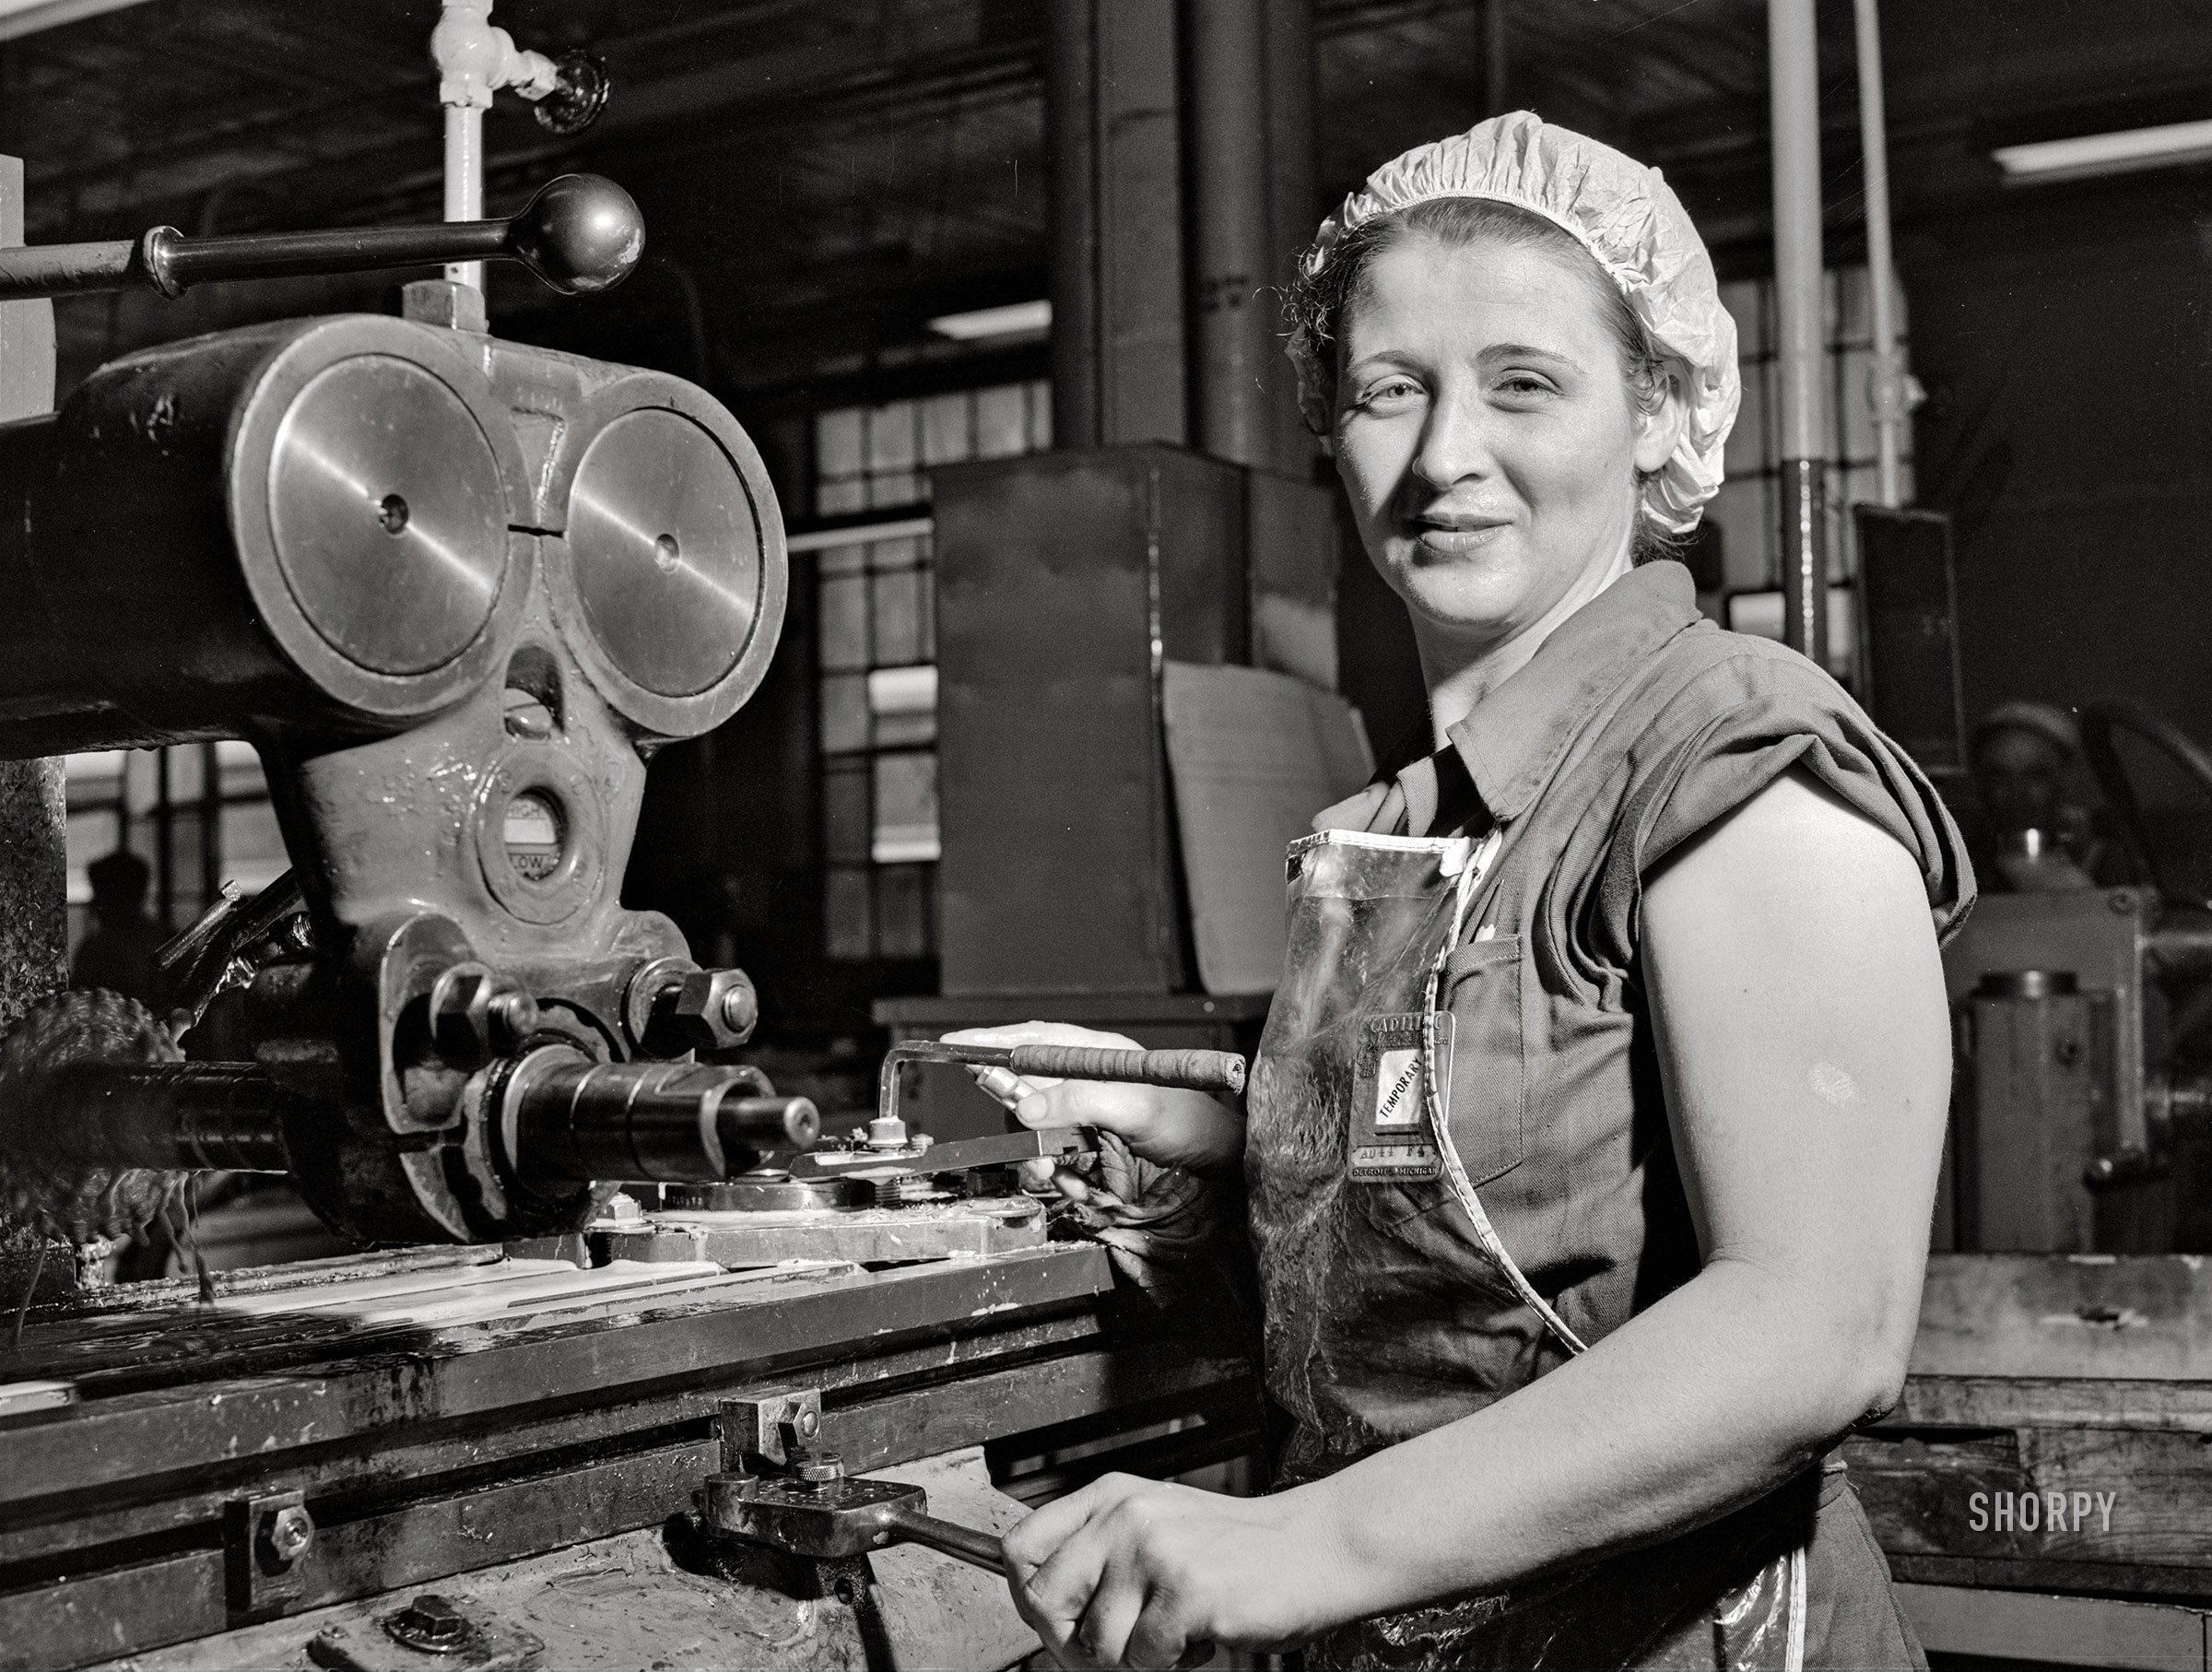 September 1942. "Detroit, Michigan. Milling machine operator at the Allison Motors plant." Acetate negative by Arthur Rothstein for the Office of War Information. View full size.